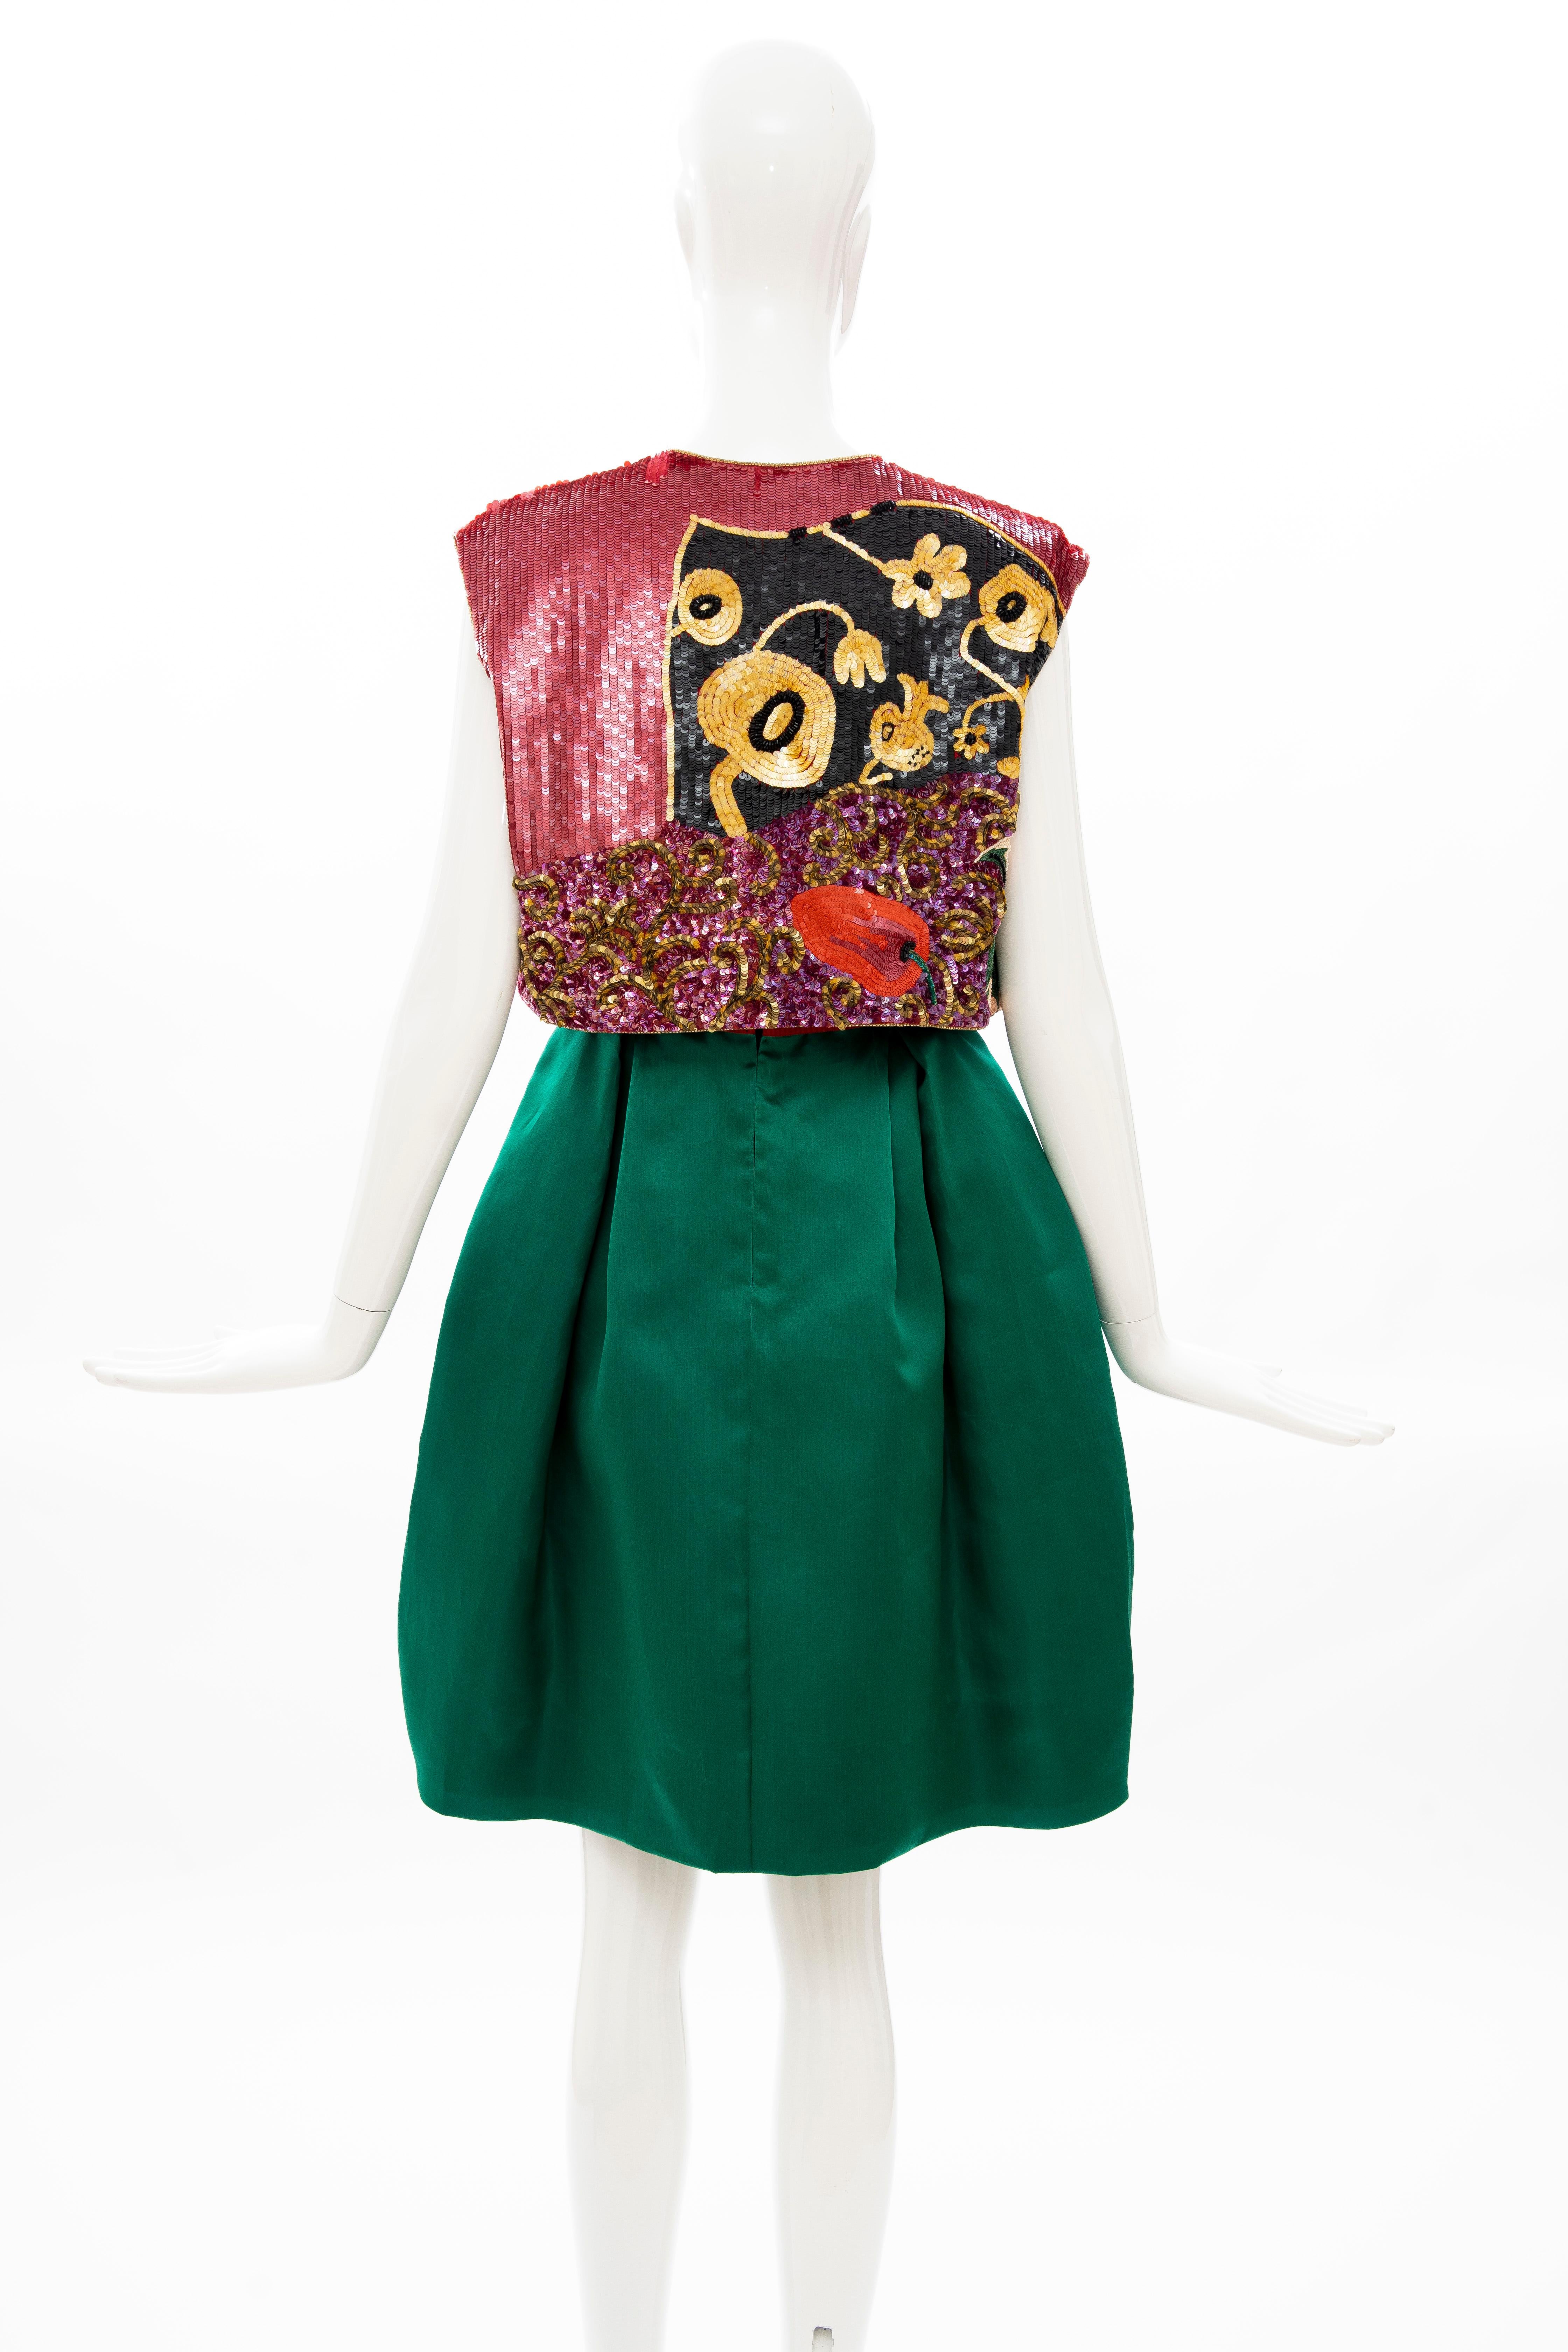 Bill Blass Matisse Inspired Embroidered Sequined Dress Ensemble, Spring 1988 For Sale 4